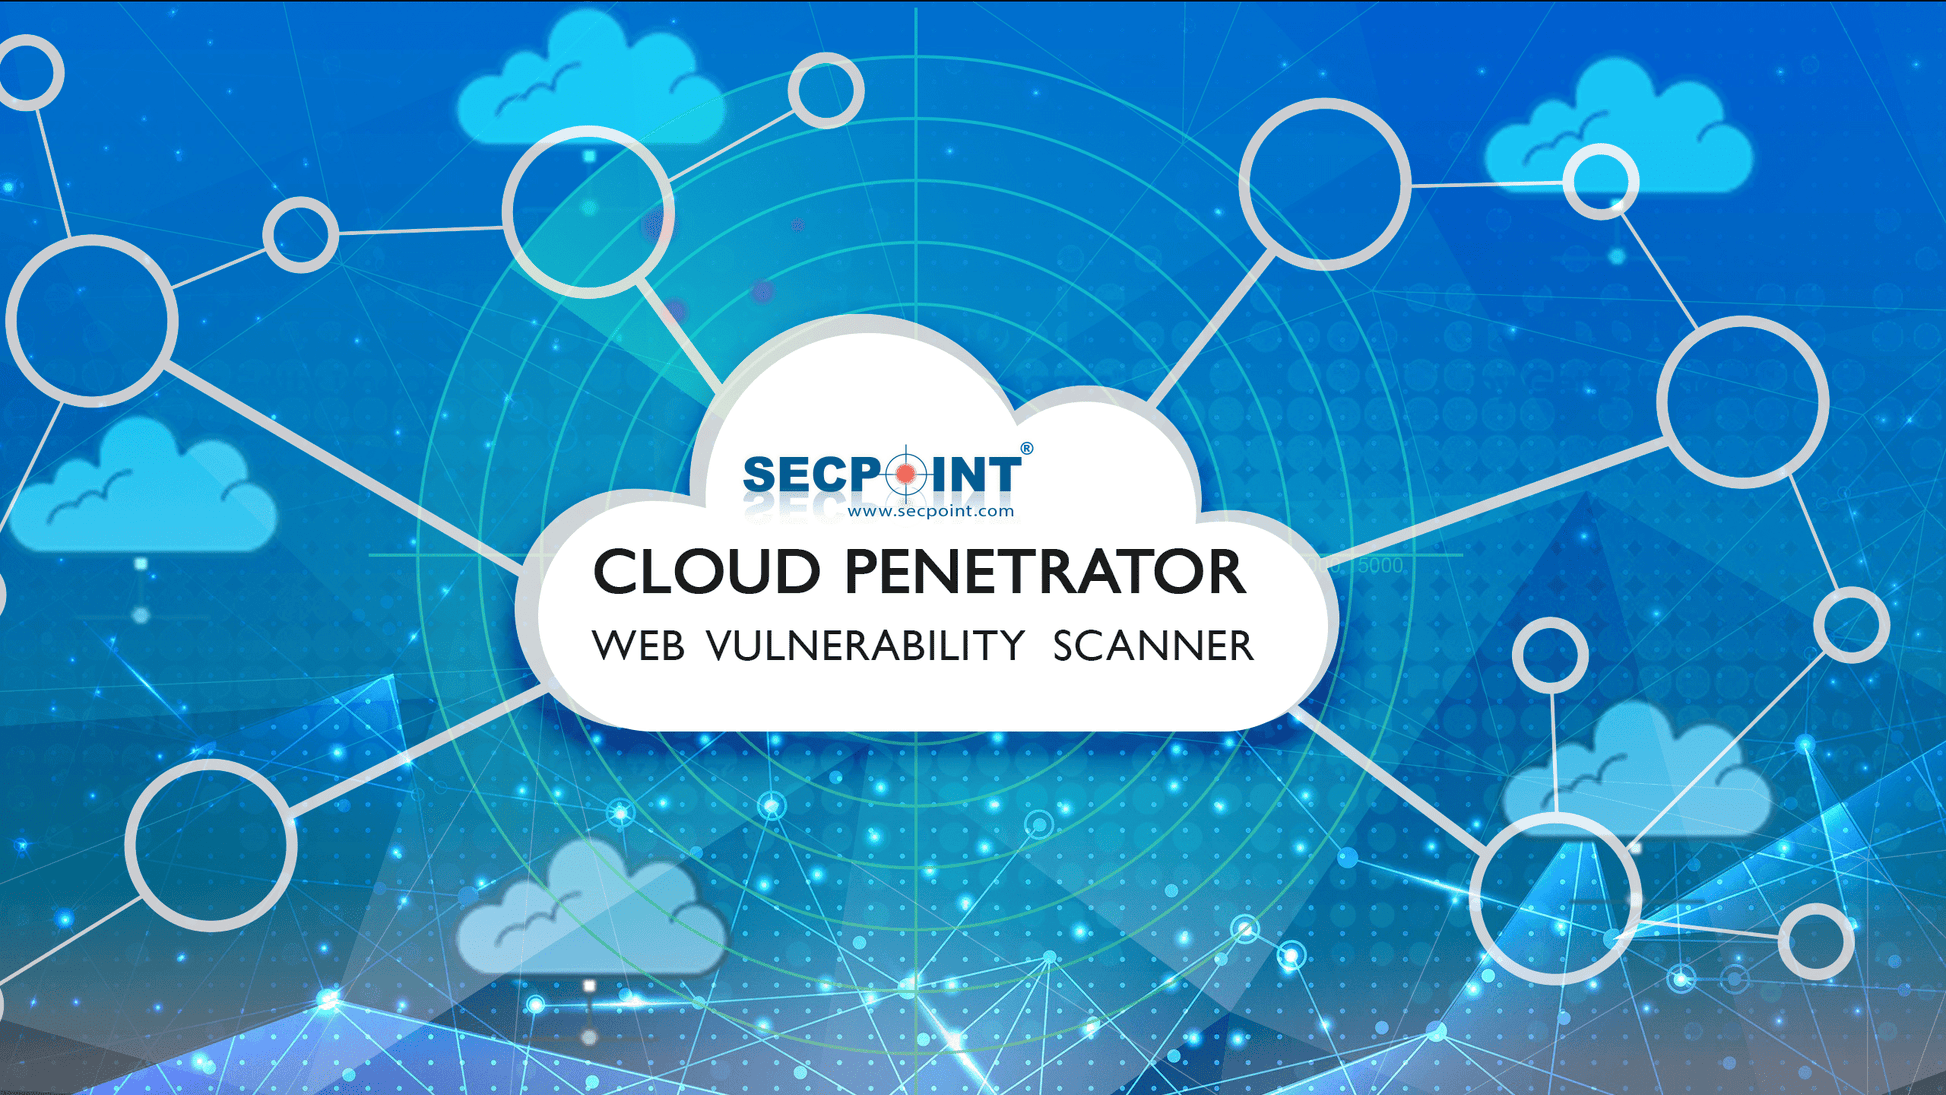 SecPoint Cloud Penetrator S9 - Vulnerability Scanning of 16 IP Static Scan License for 1 Year - SecPoint